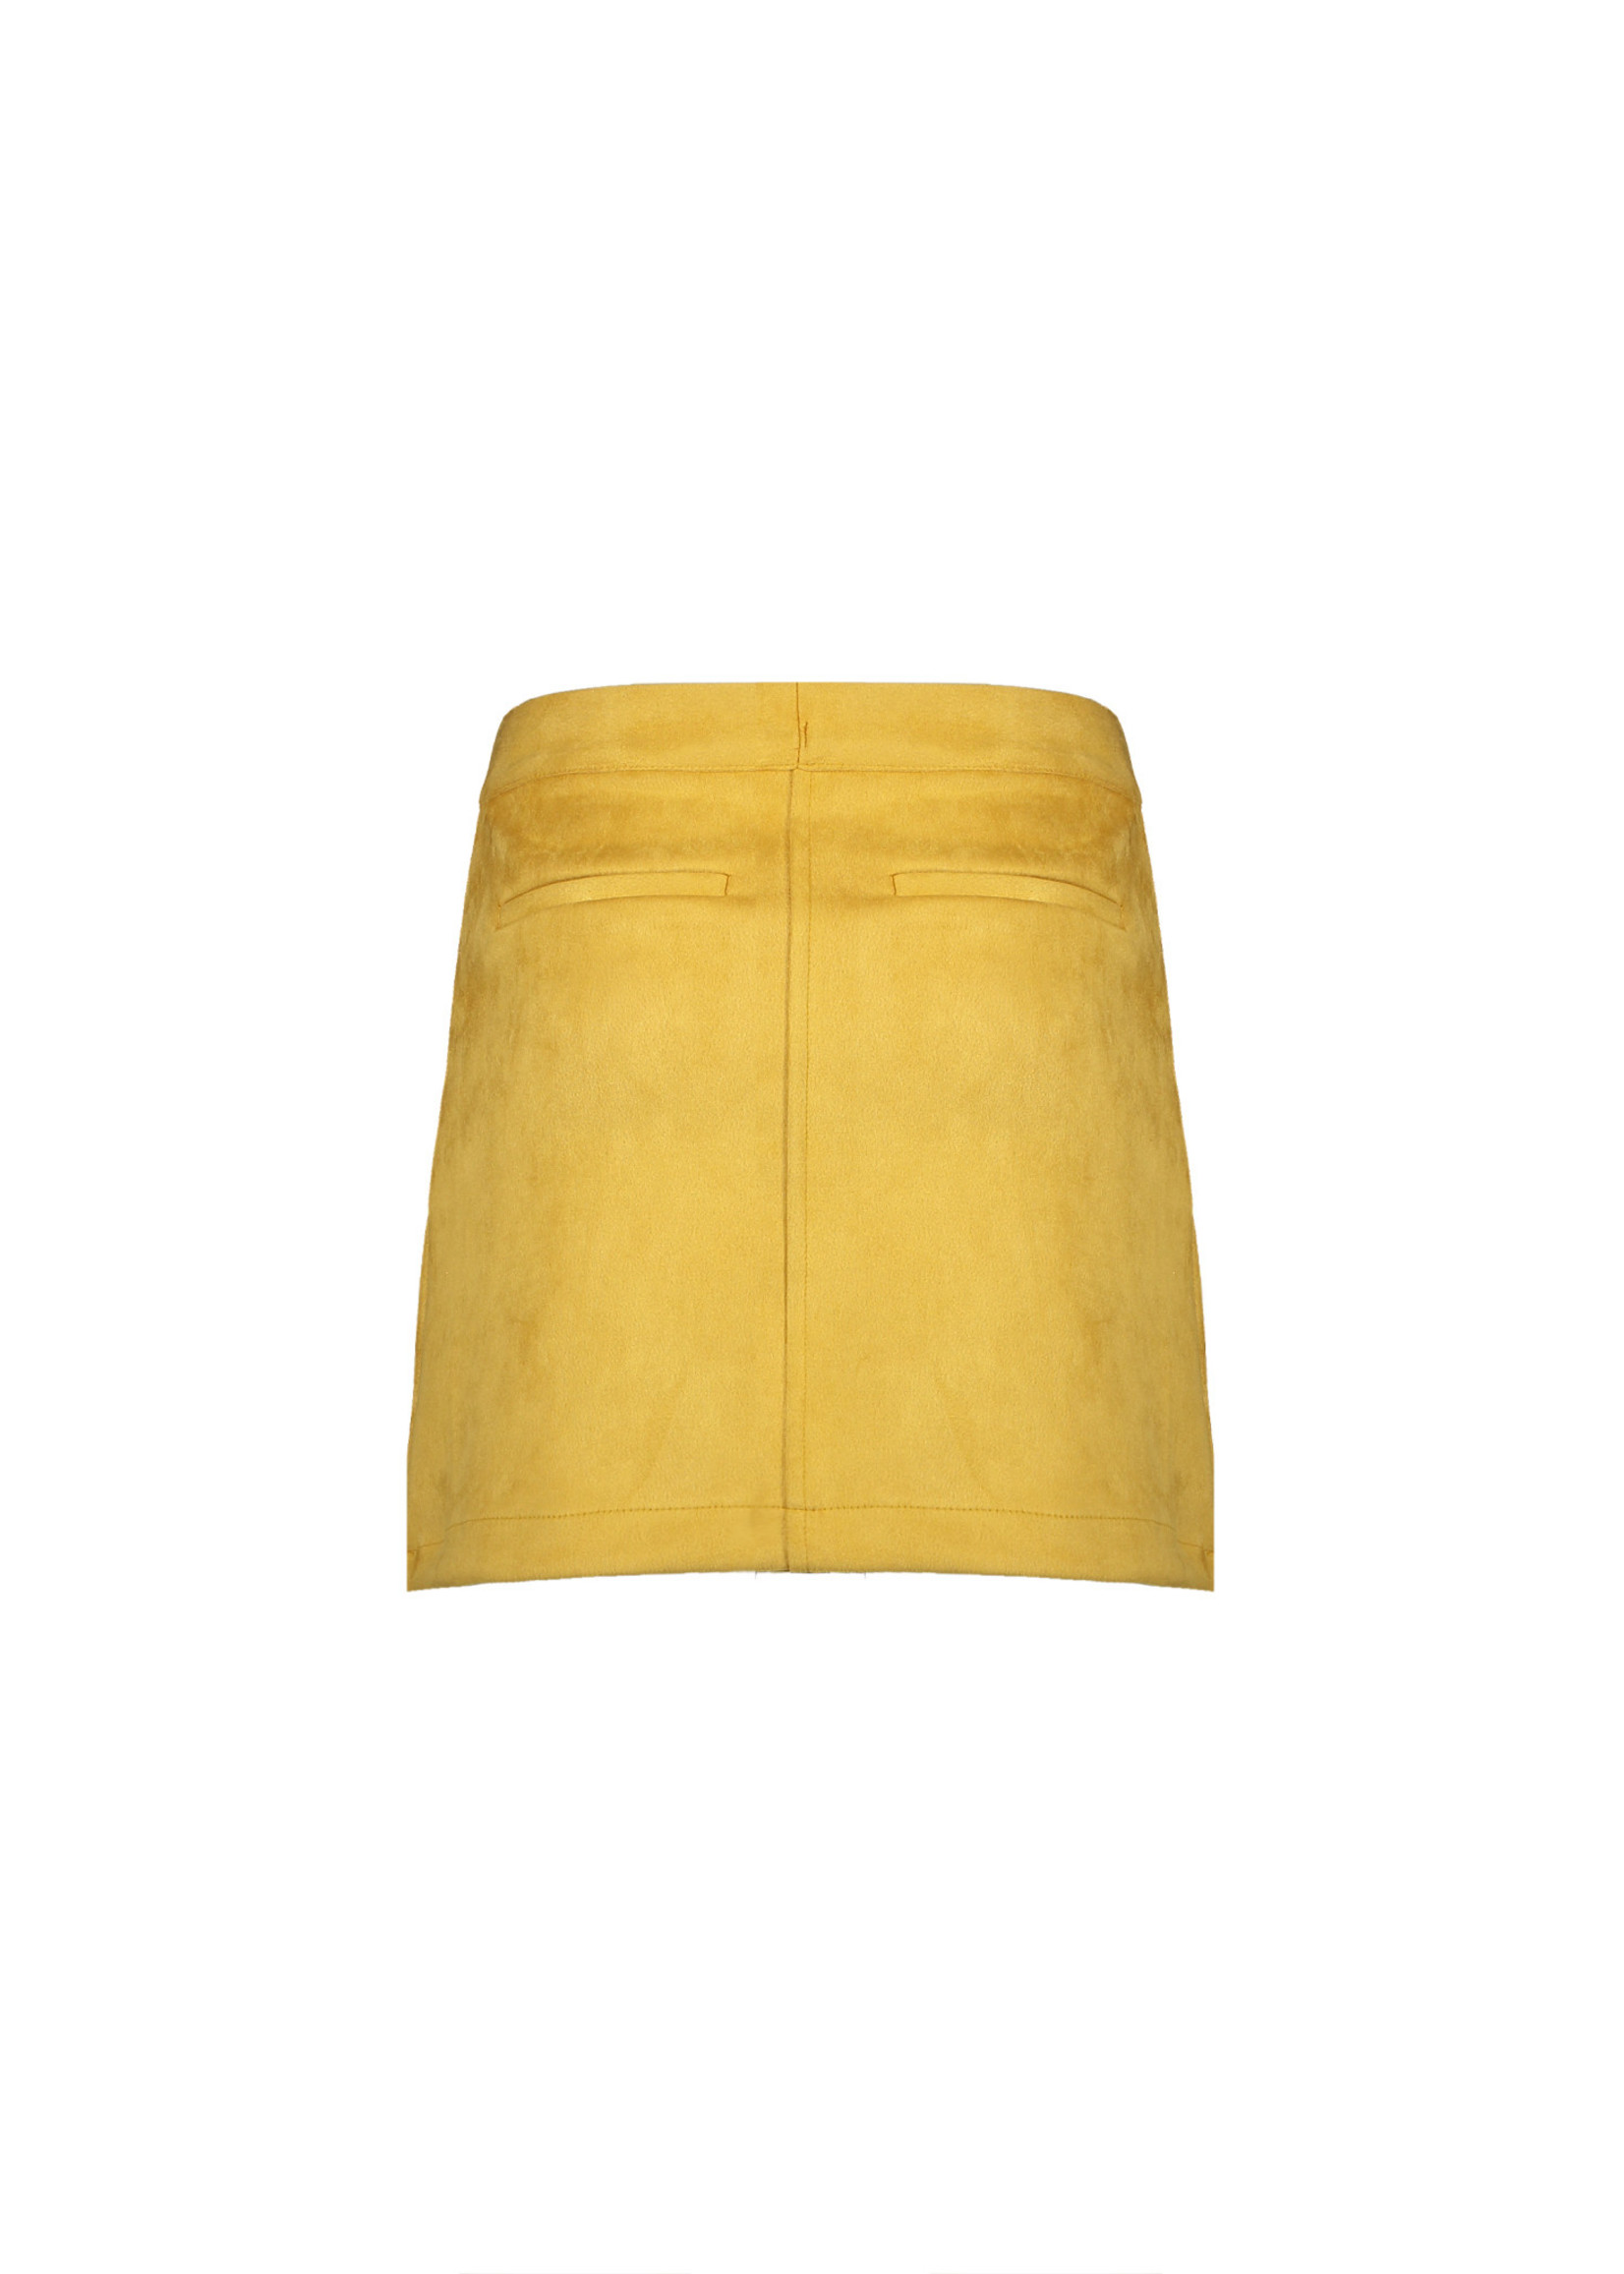 Nobell Nobell NishaB soft suede short A-line skirt with buttons Q008-3702 Yellow Gold